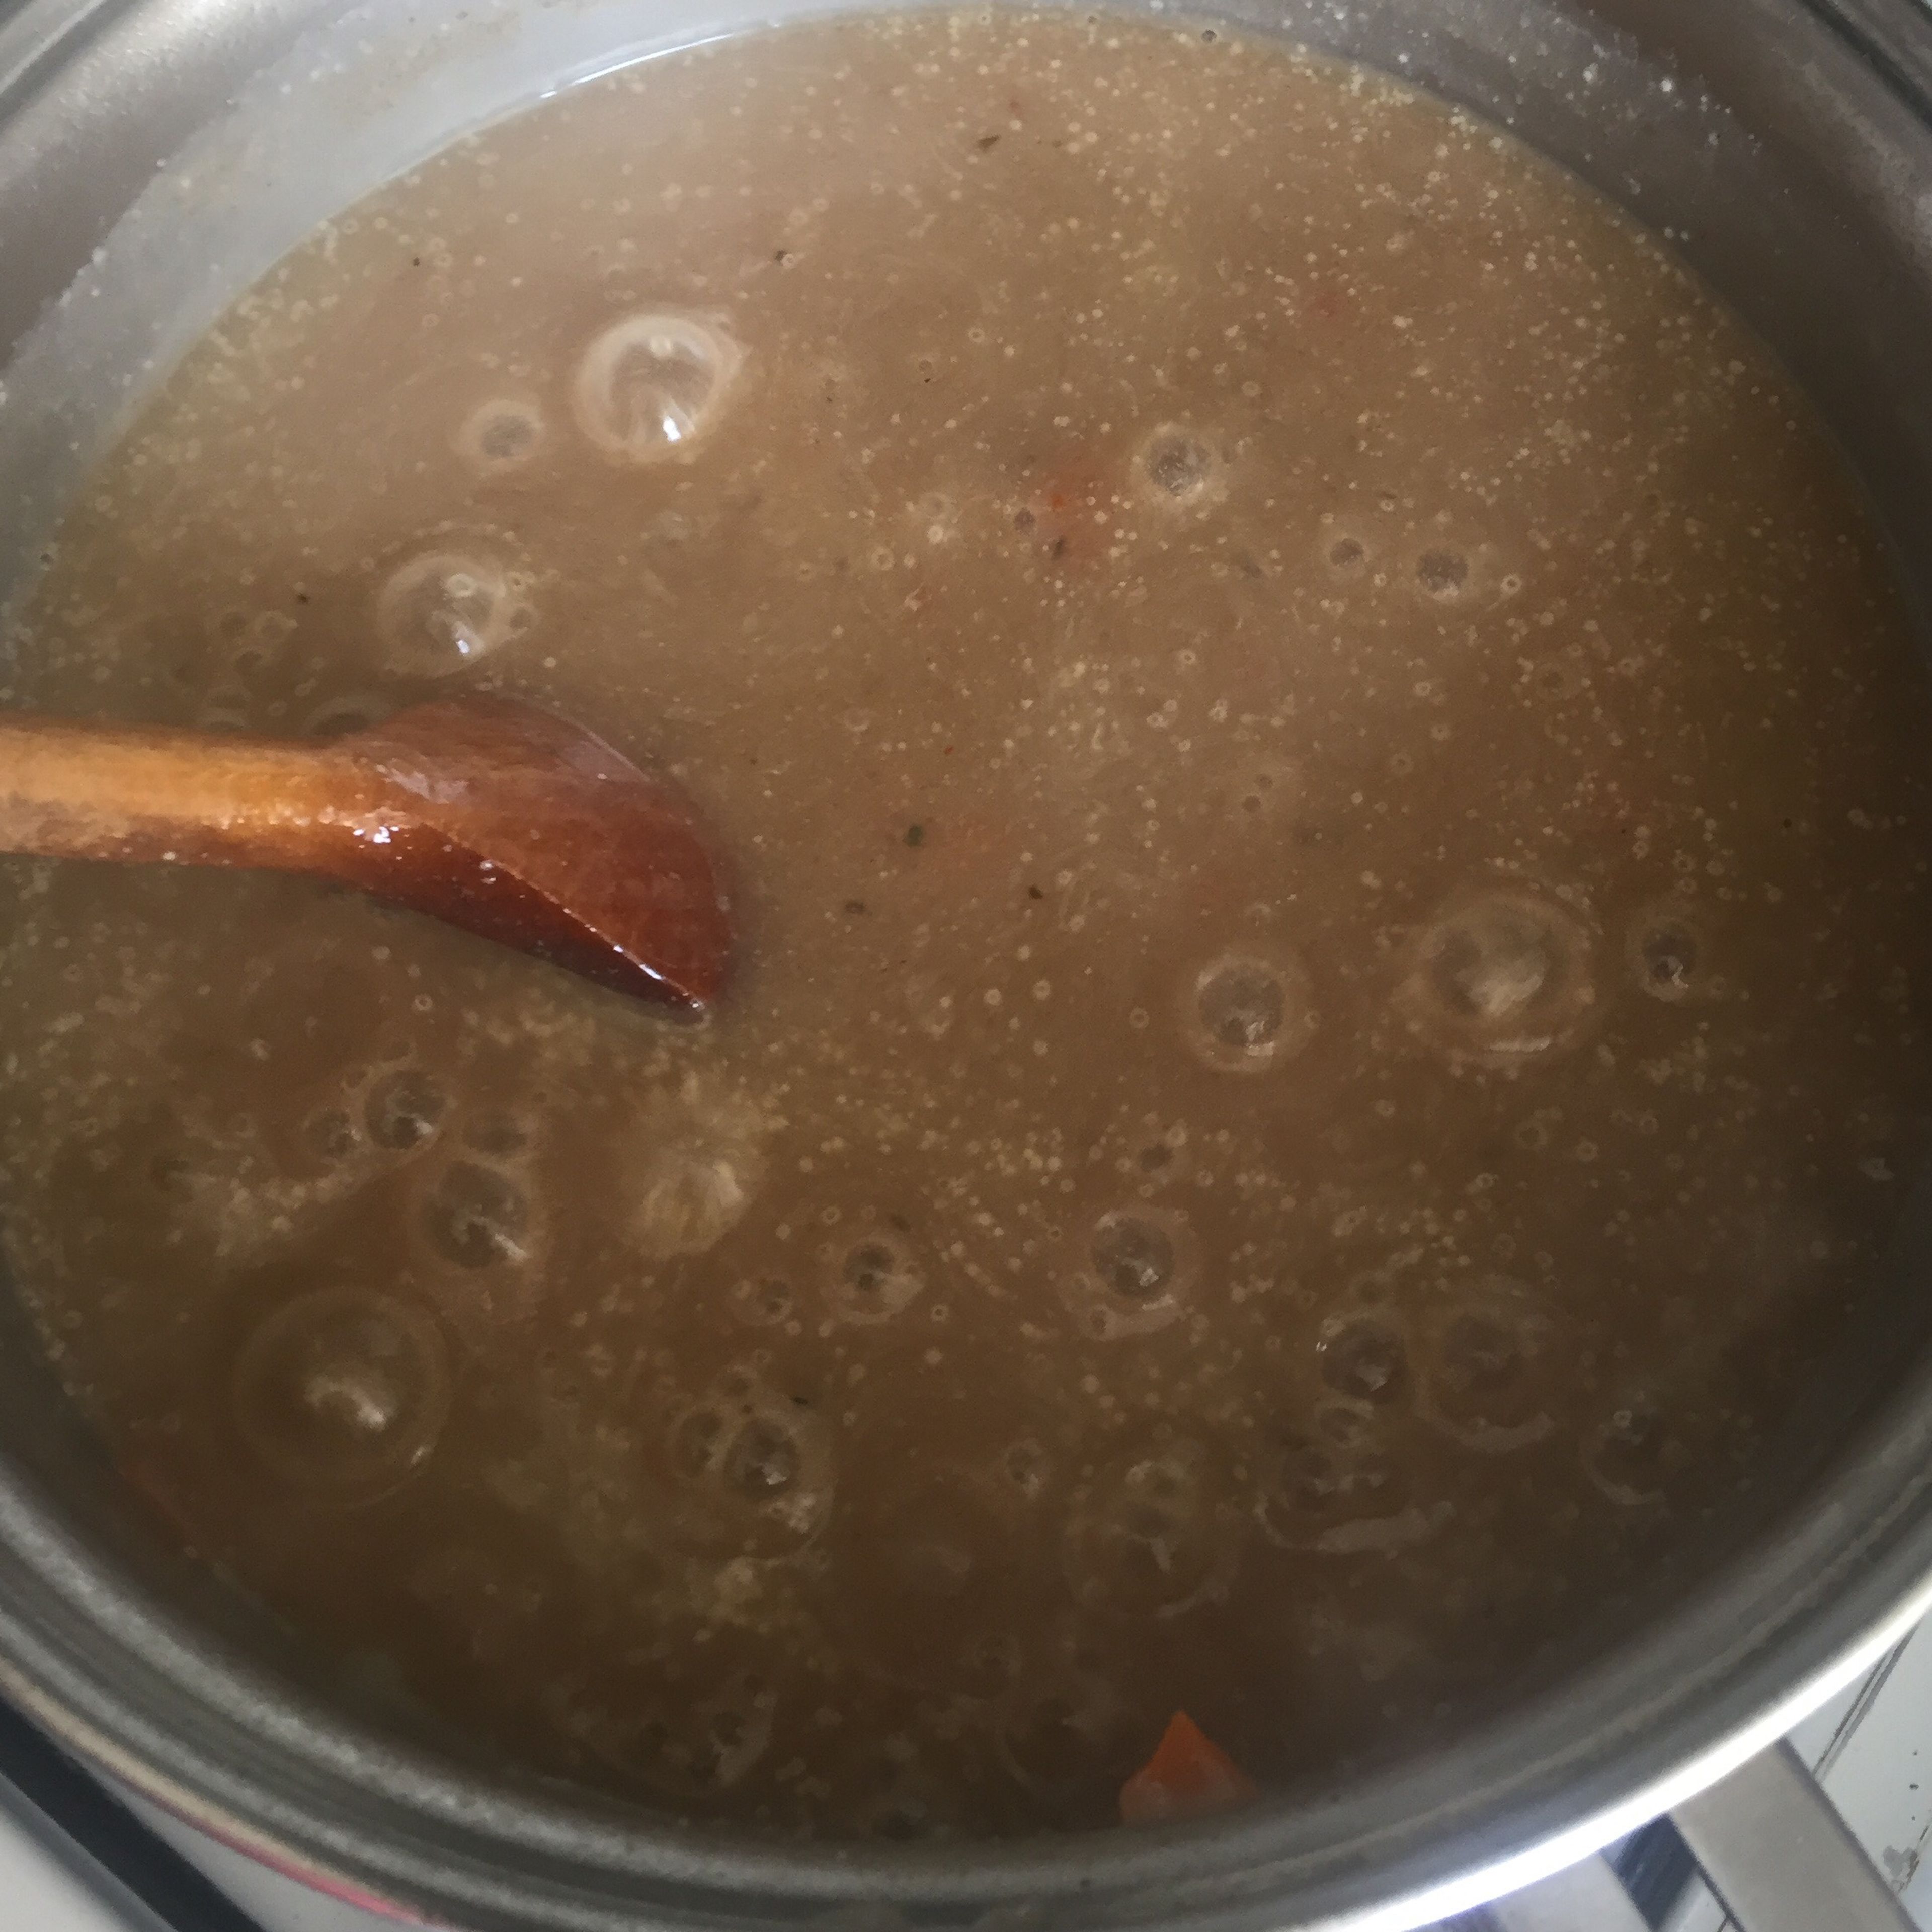 Once sauce boils and thickens, it is ready to serve!